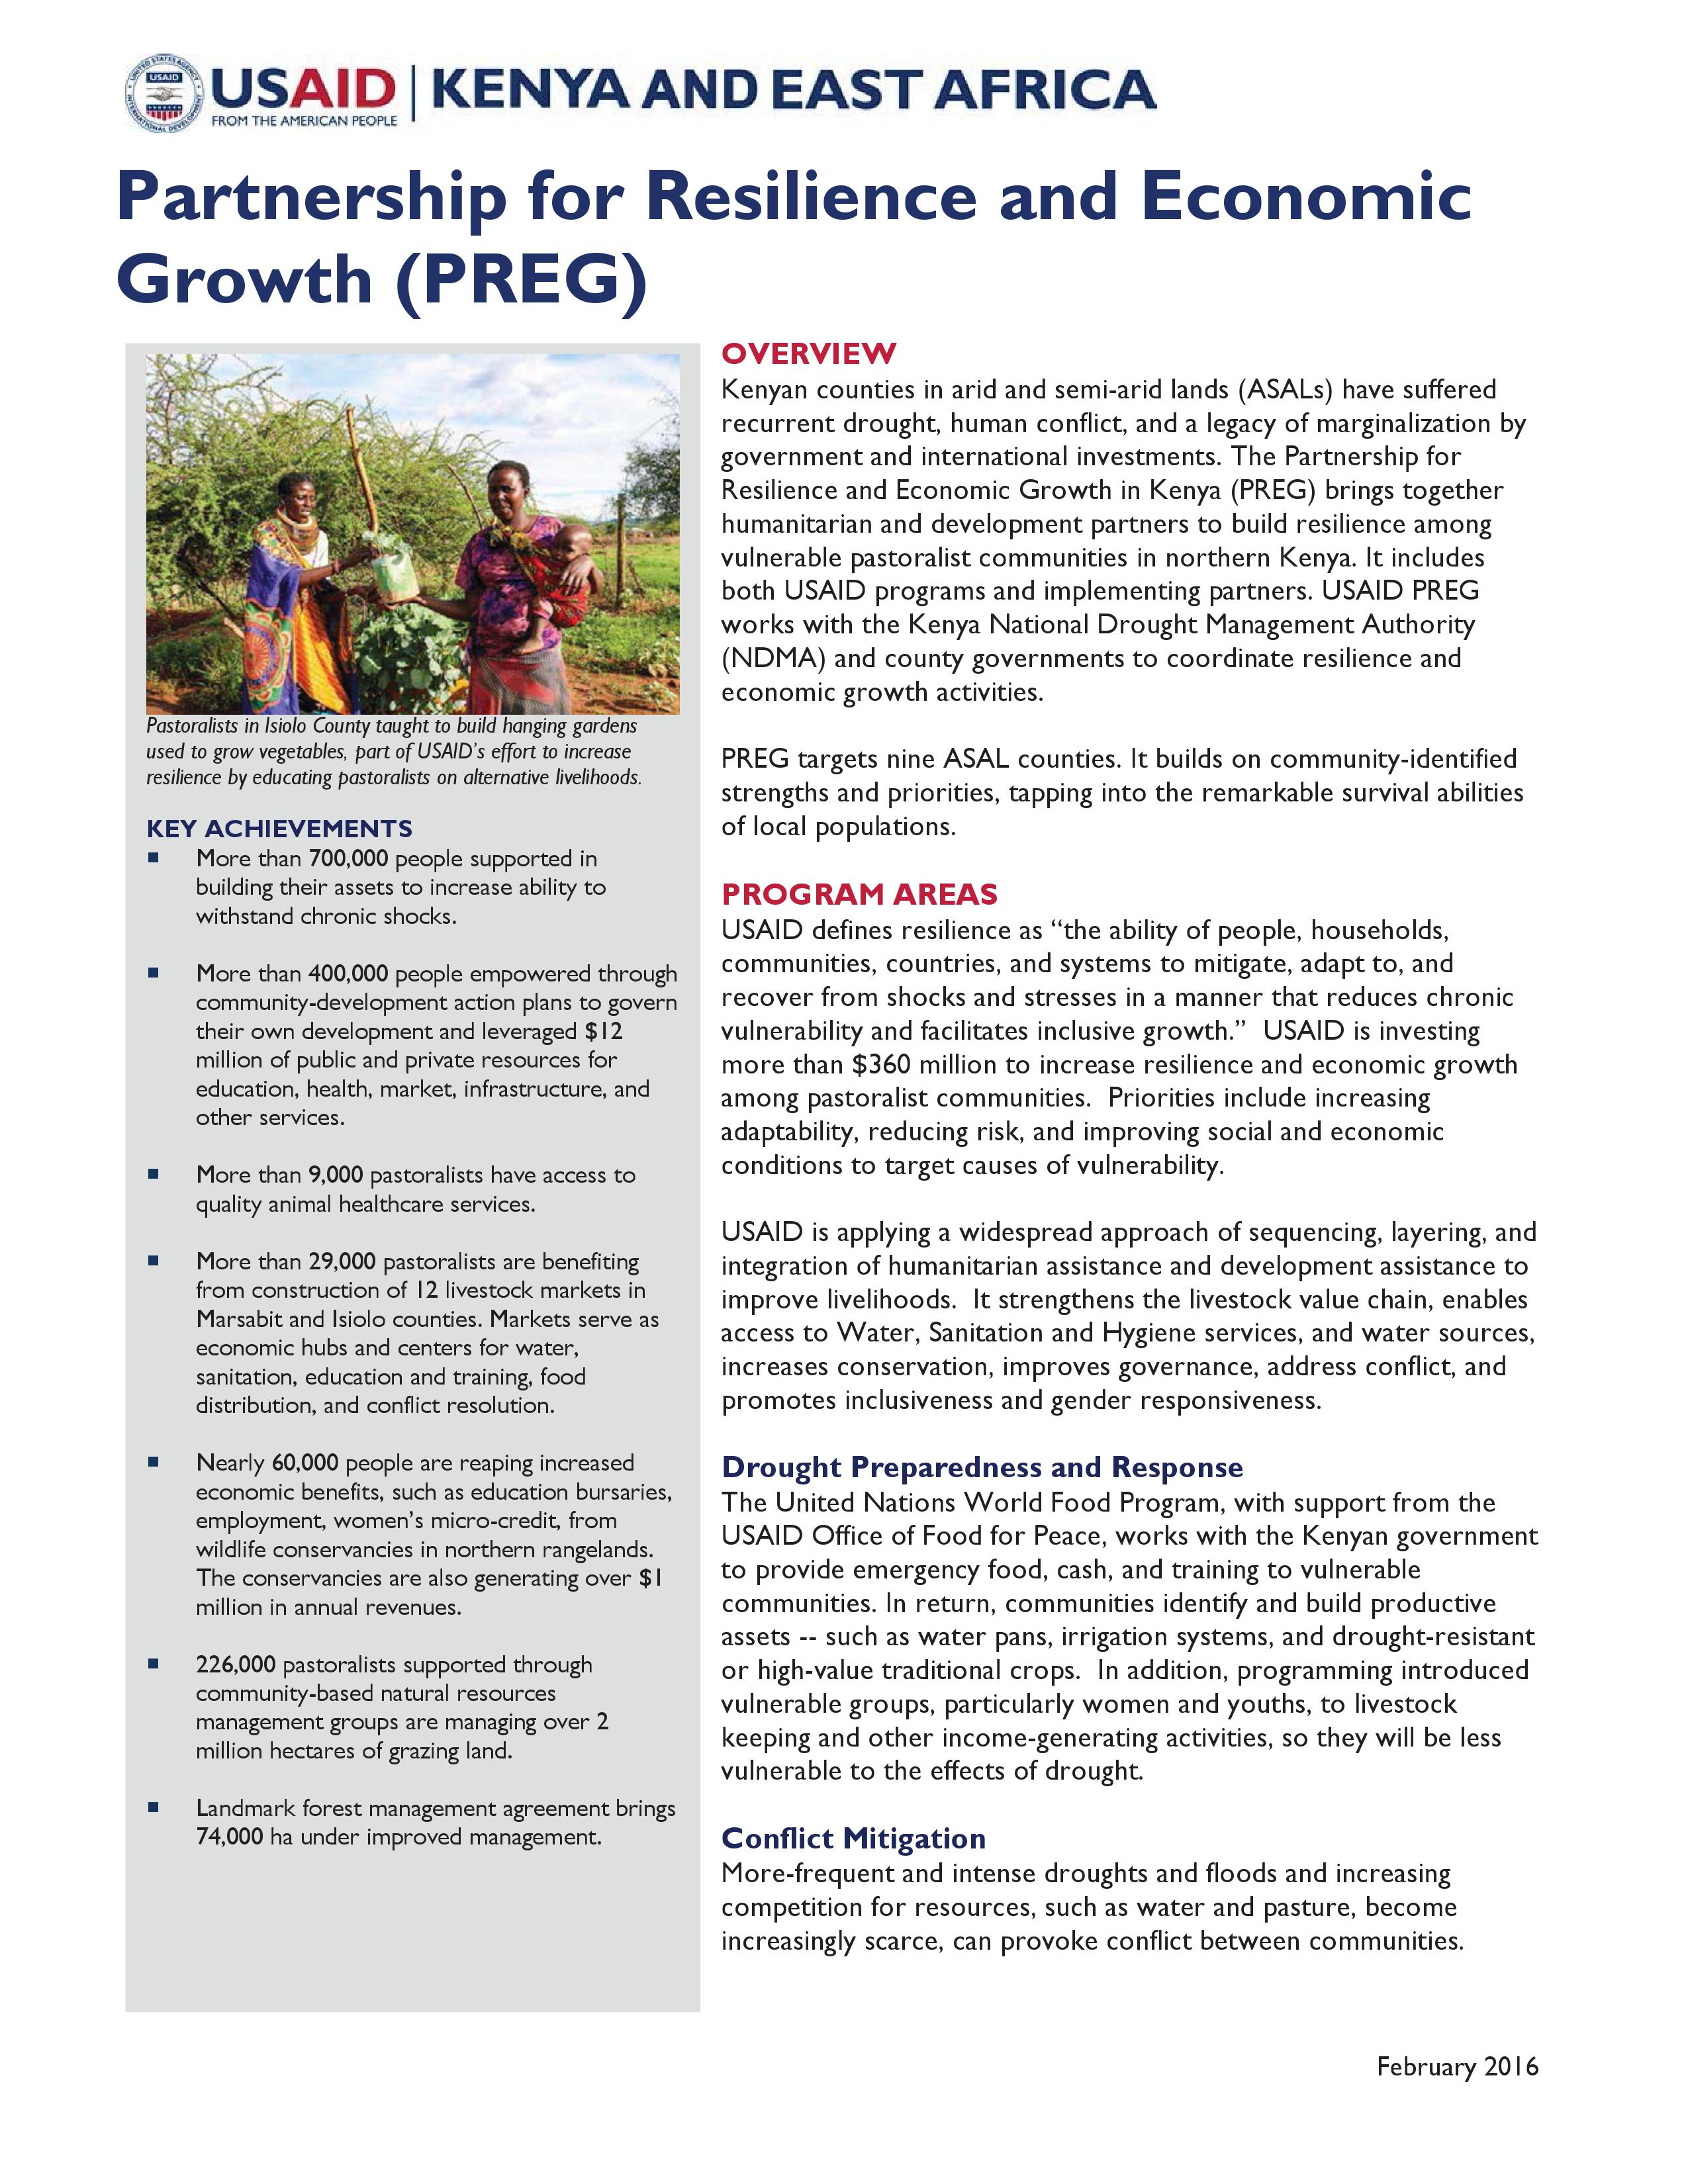 Partnership for Resilience and Economic Growth fact sheet